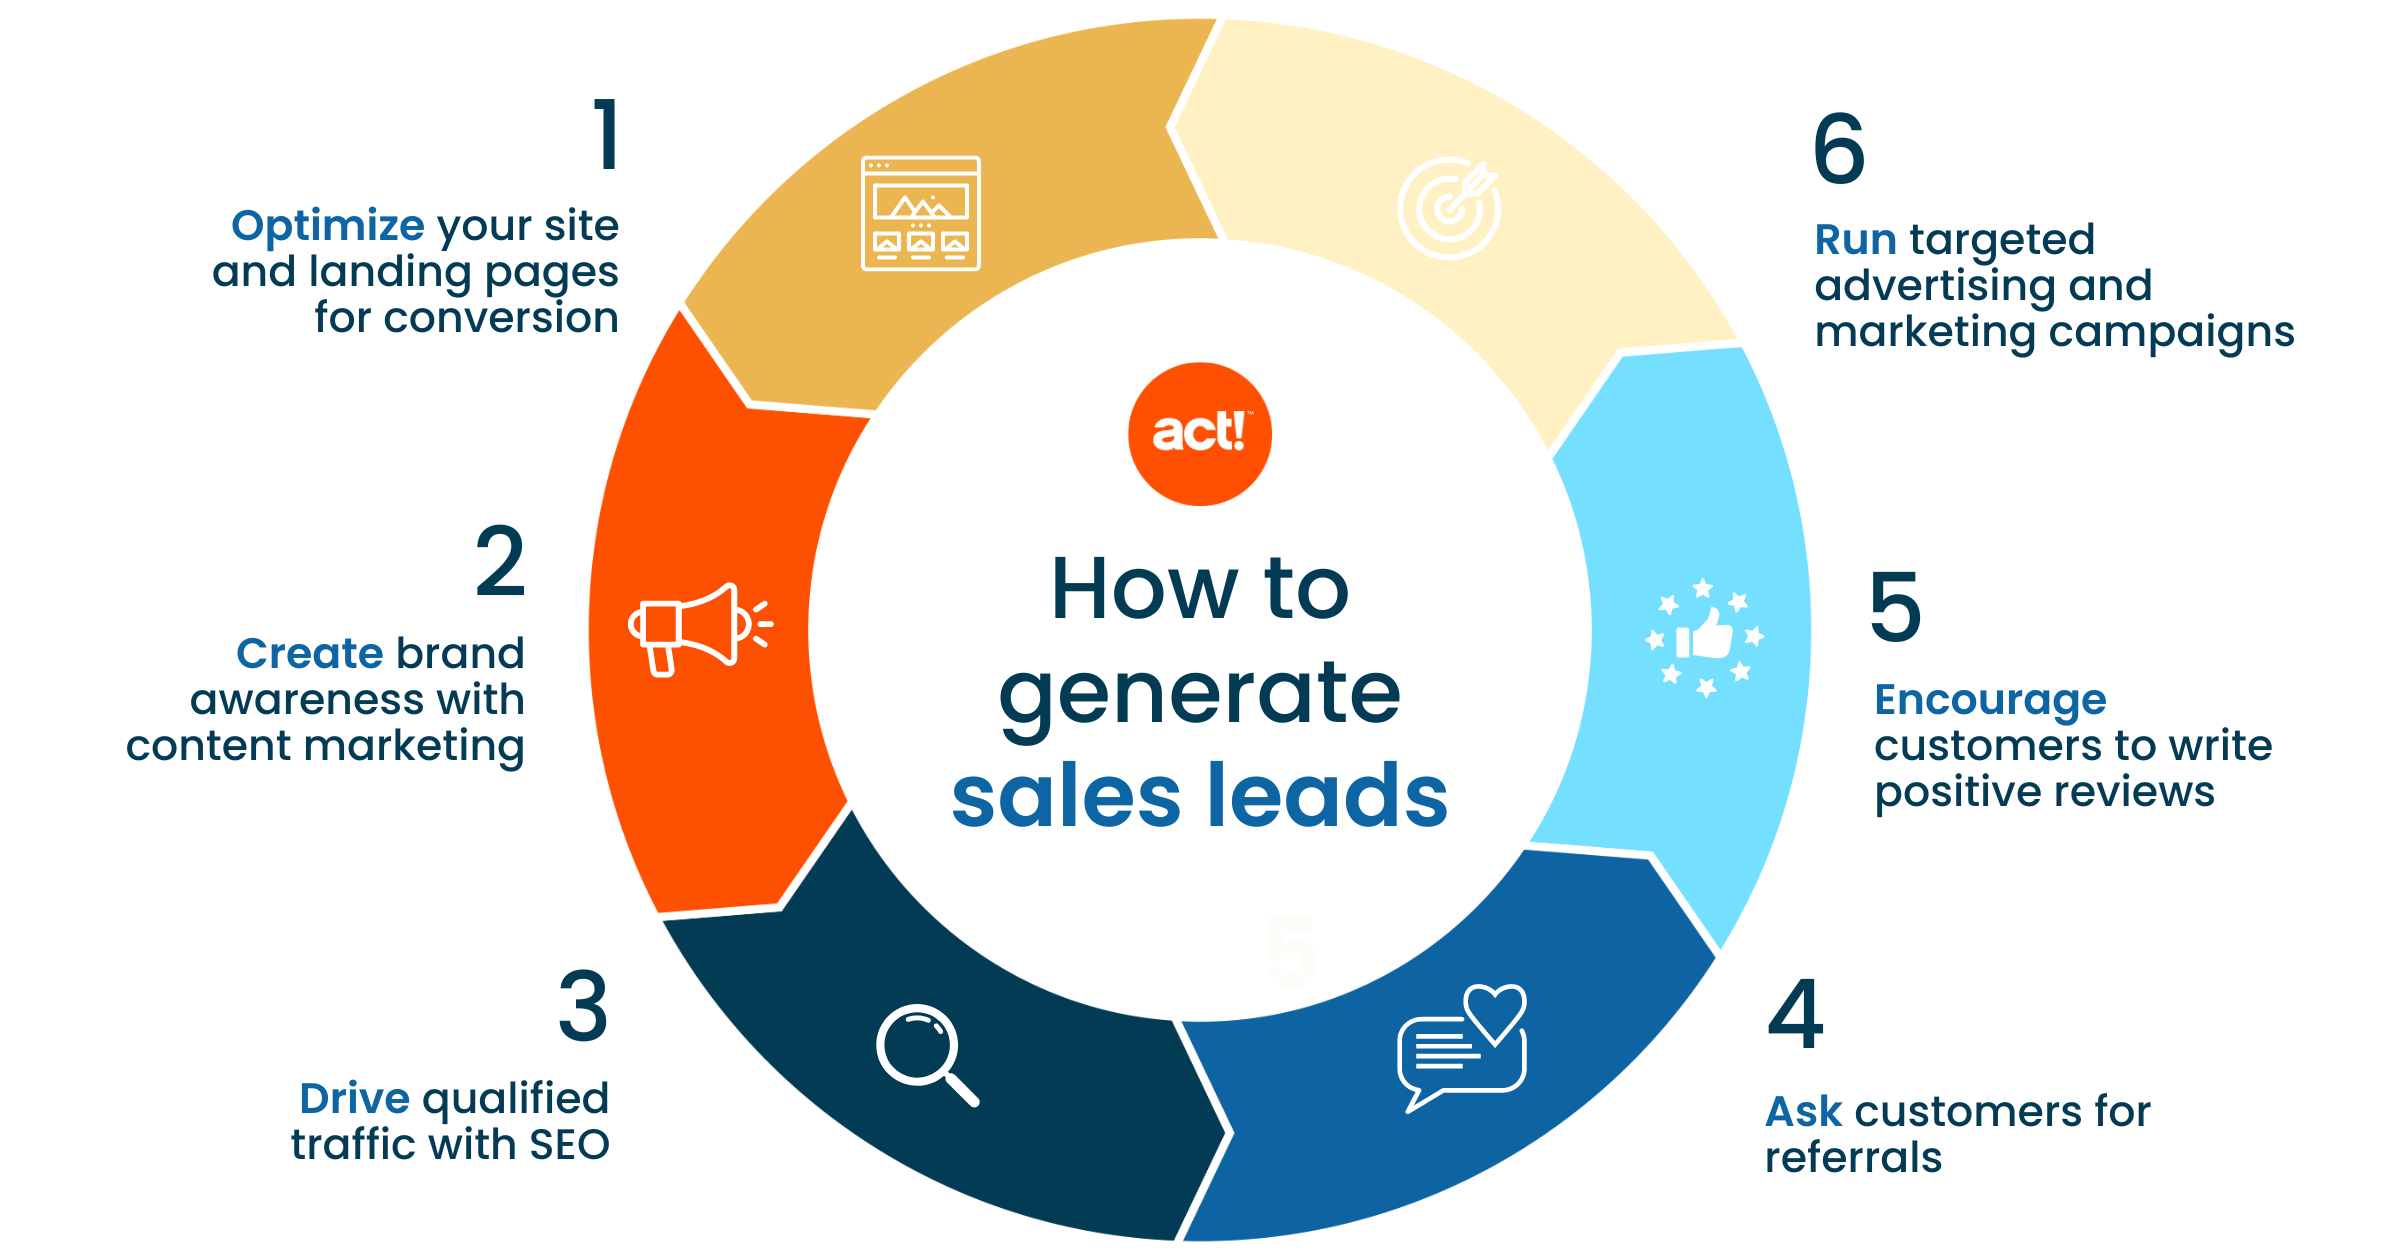 How to generate sales leads 1. Optimize your site and landing pages for conversion 2. Create brand awareness with content marketing 3. Drive qualified traffic with SEO 4. Ask customers for referrals 5. Encourage customers to write positive reviews 6. Run targeted advertising and marketing campaigns